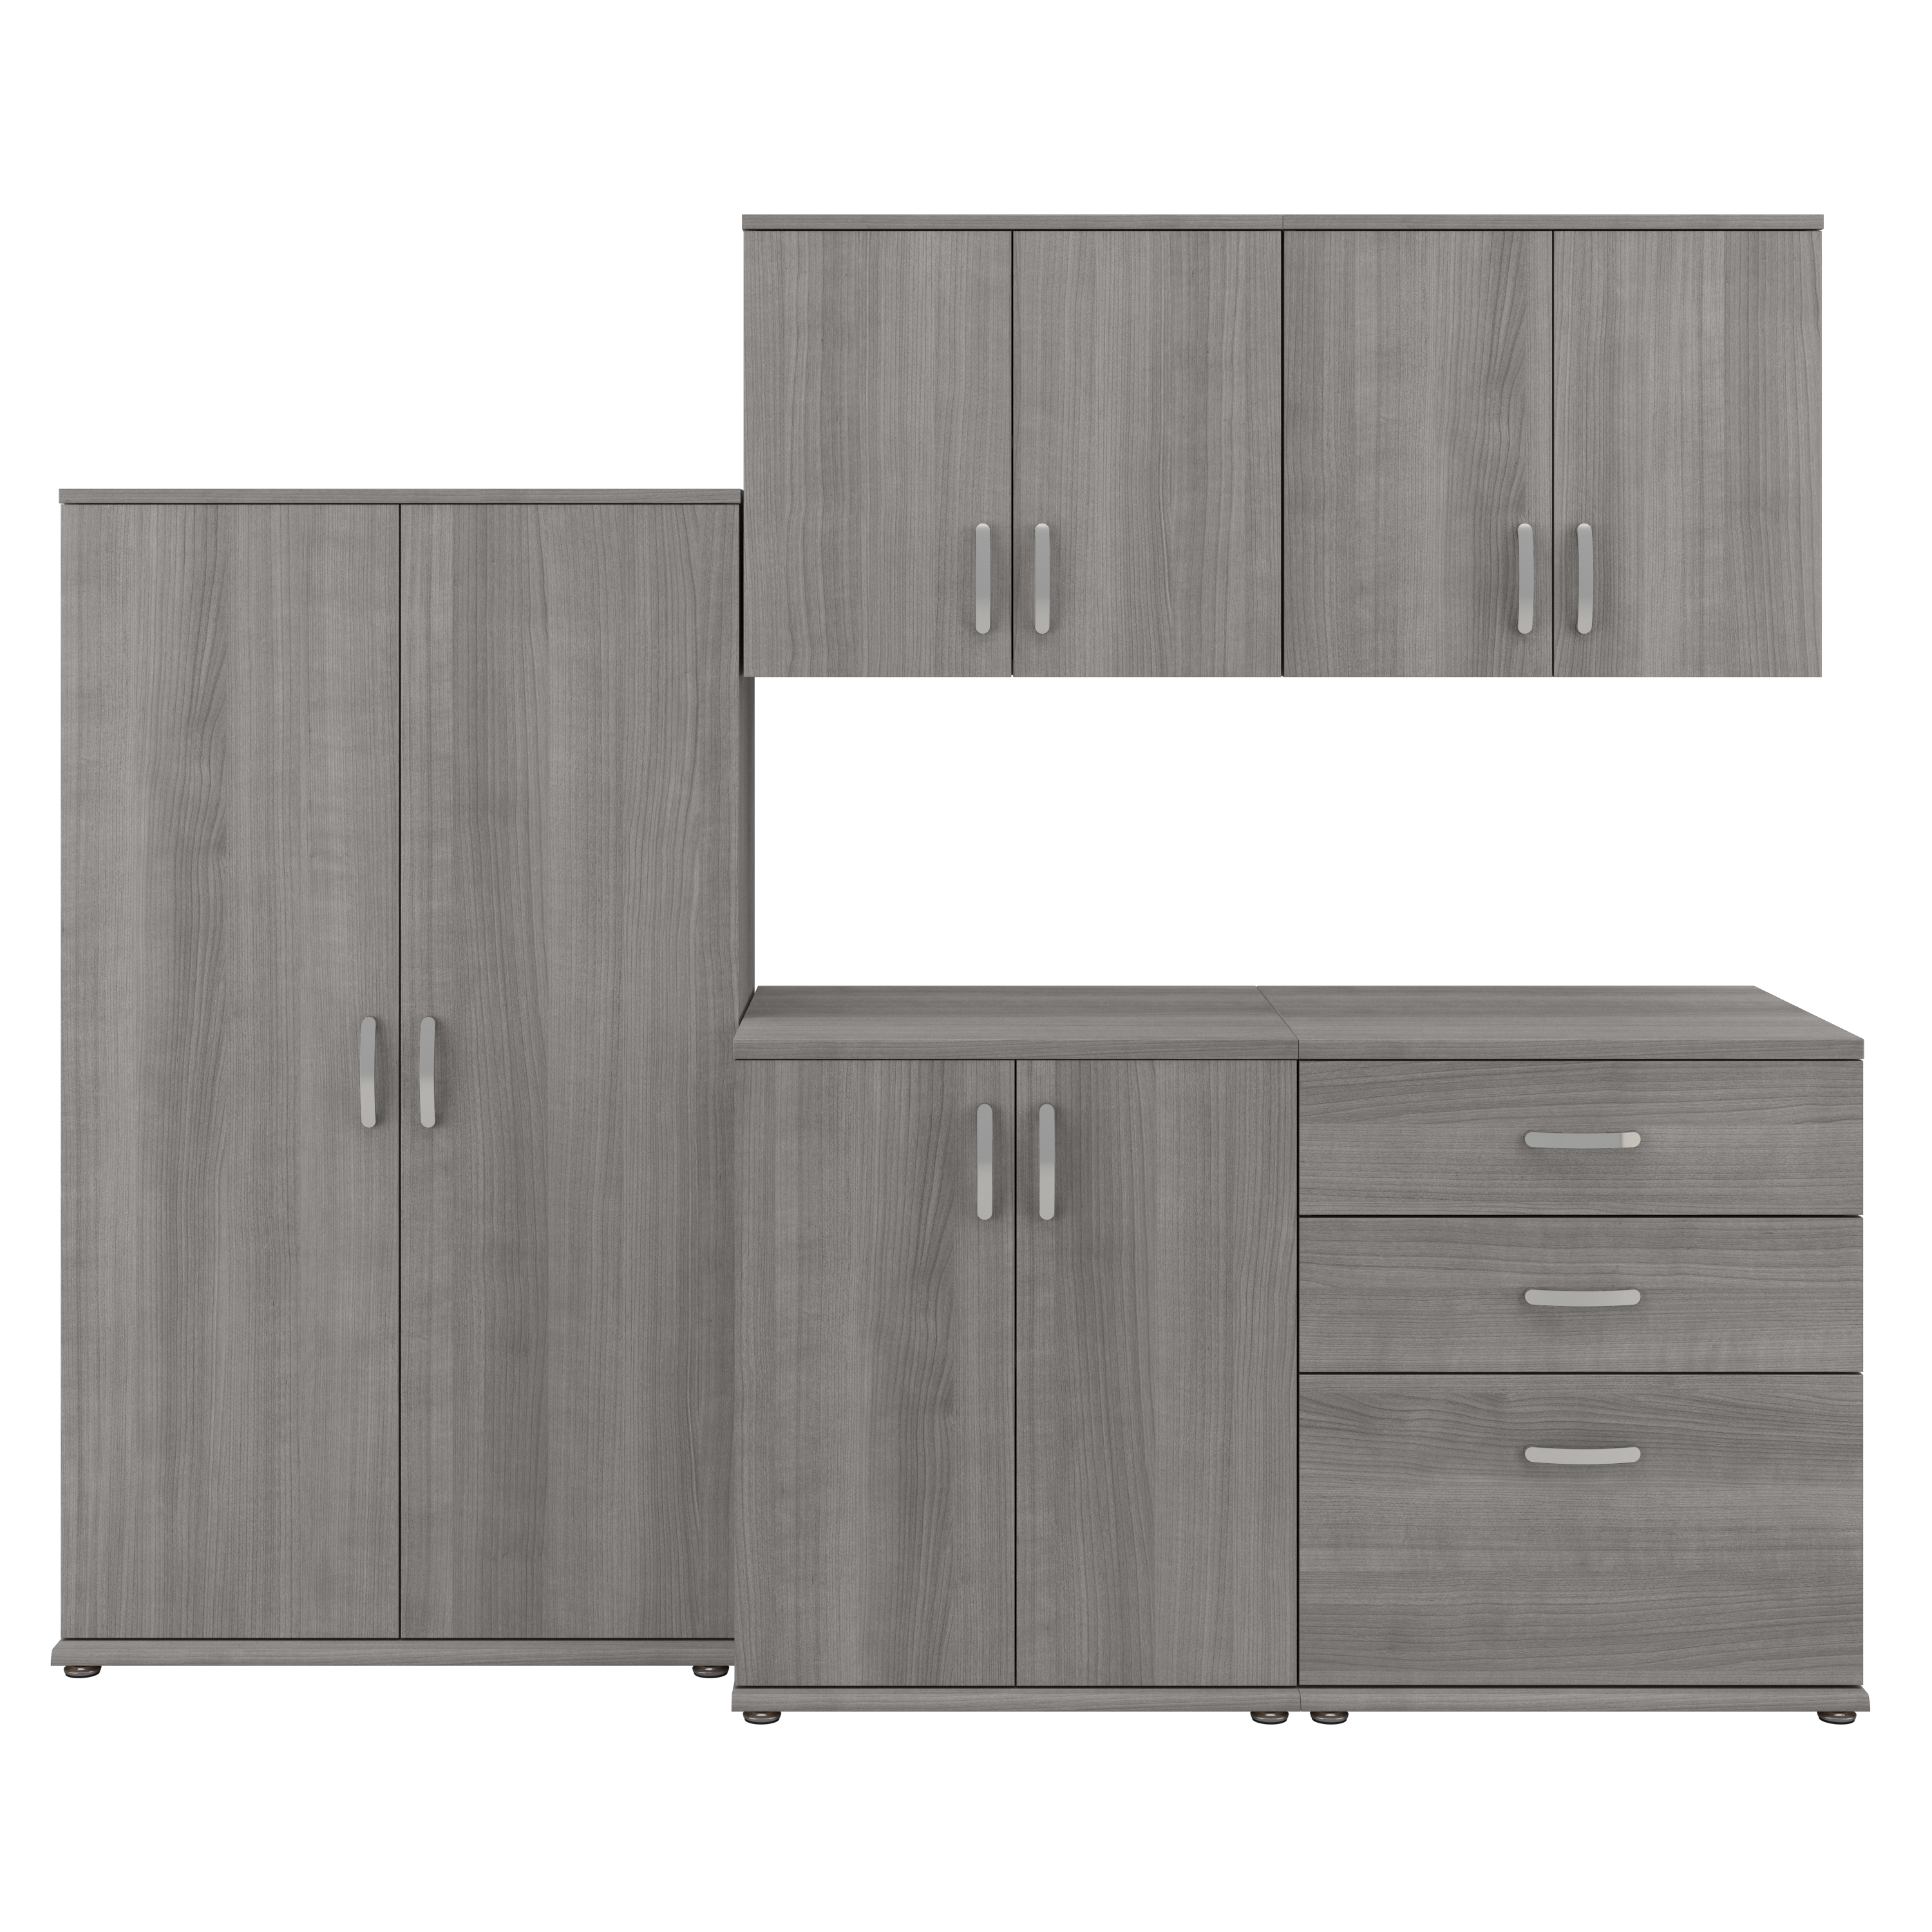 Shop Bush Business Furniture Universal 5 Piece Modular Garage Storage Set with Floor and Wall Cabinets 02 GAS003PG #color_platinum gray